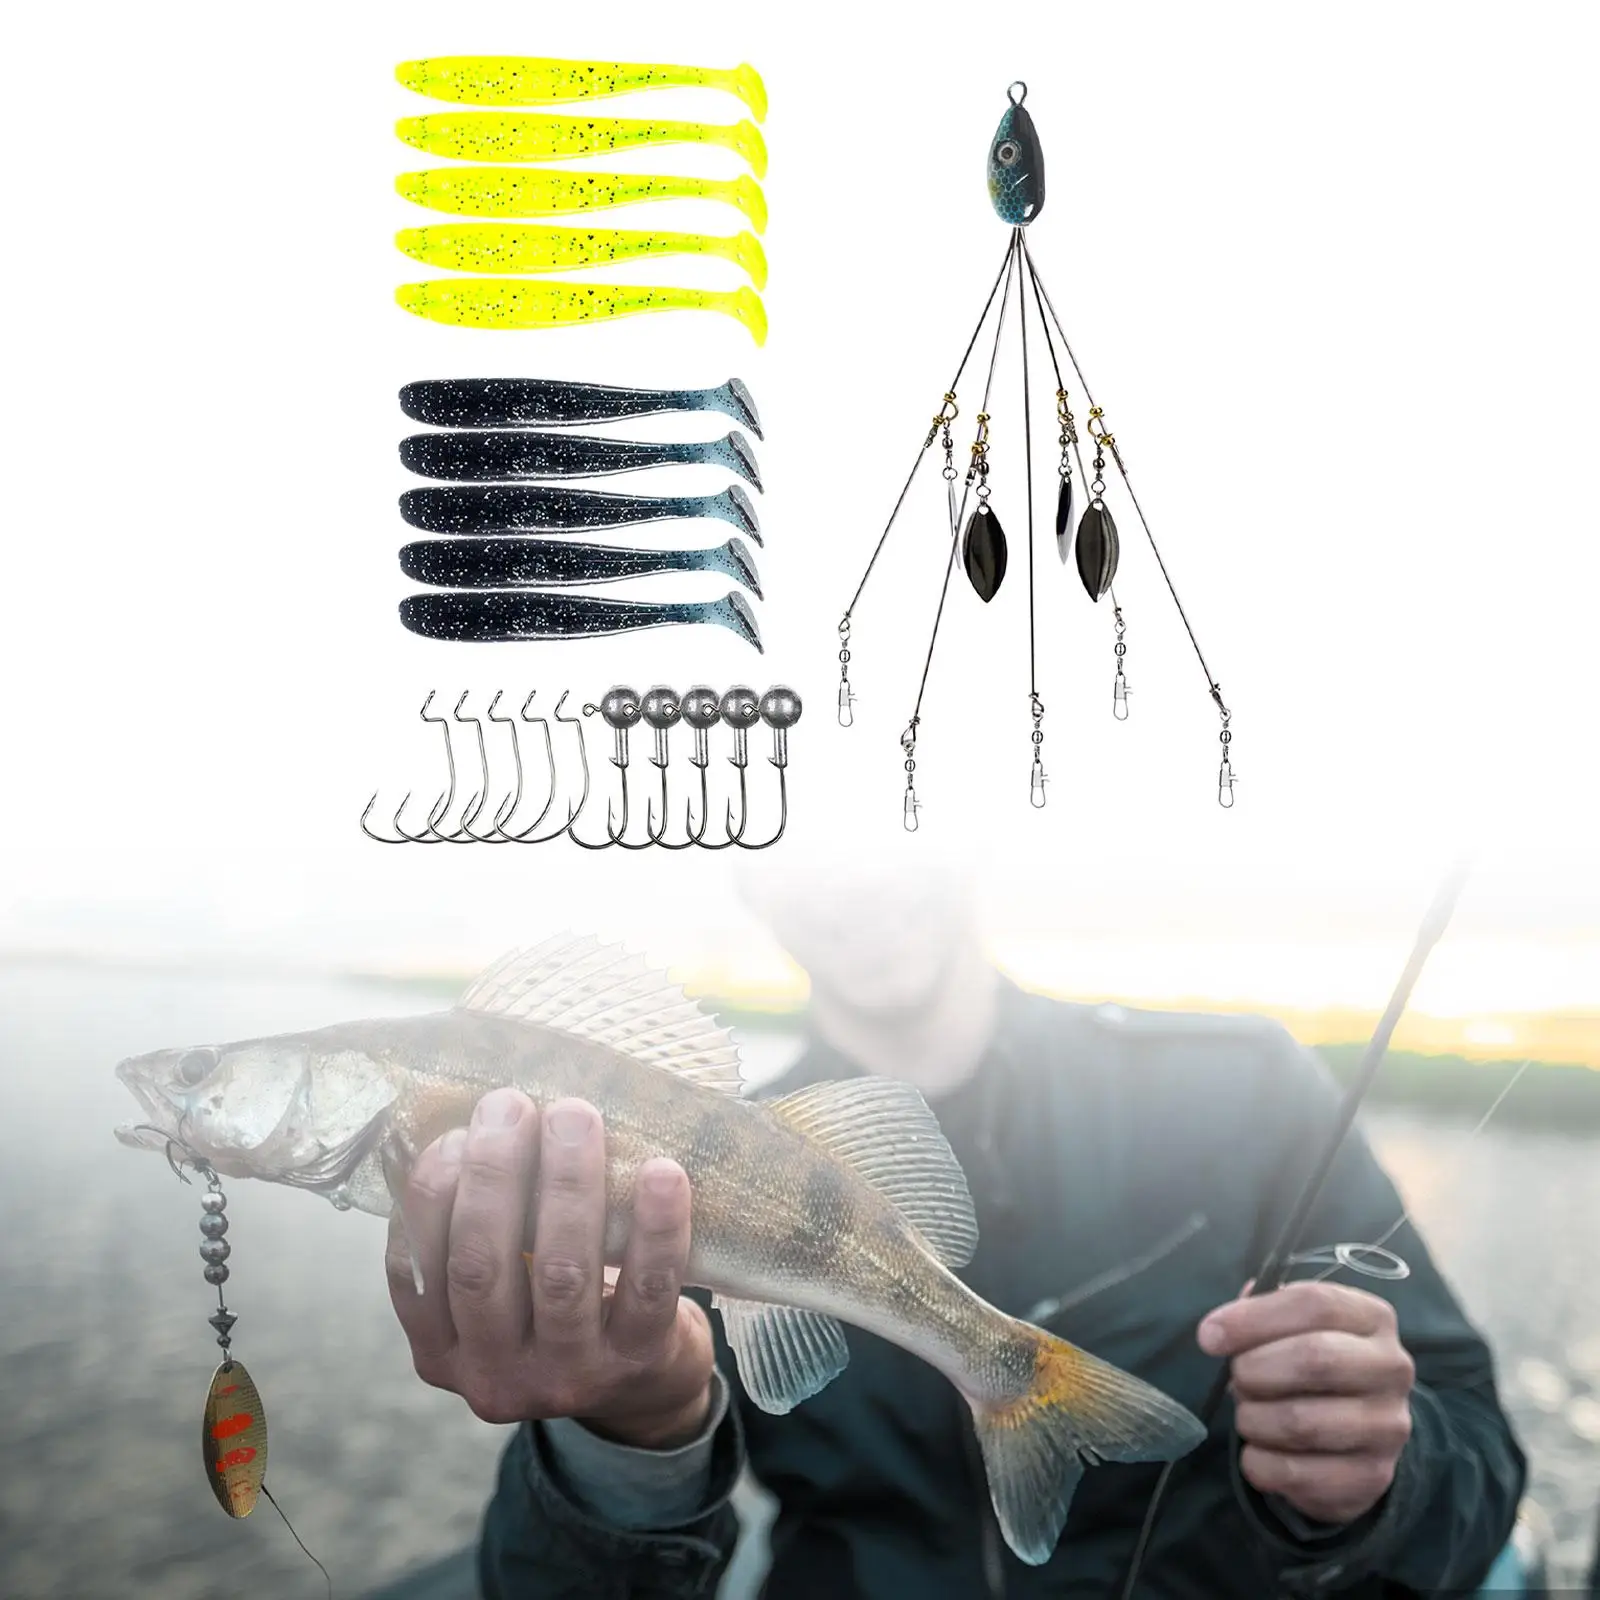 Umbrella Rig 5 Arms with Soft Swimbait and Hooks A Rig Bass Fishing Lure  Bait for Bass Crappie Perch Walleye Pickerel - AliExpress